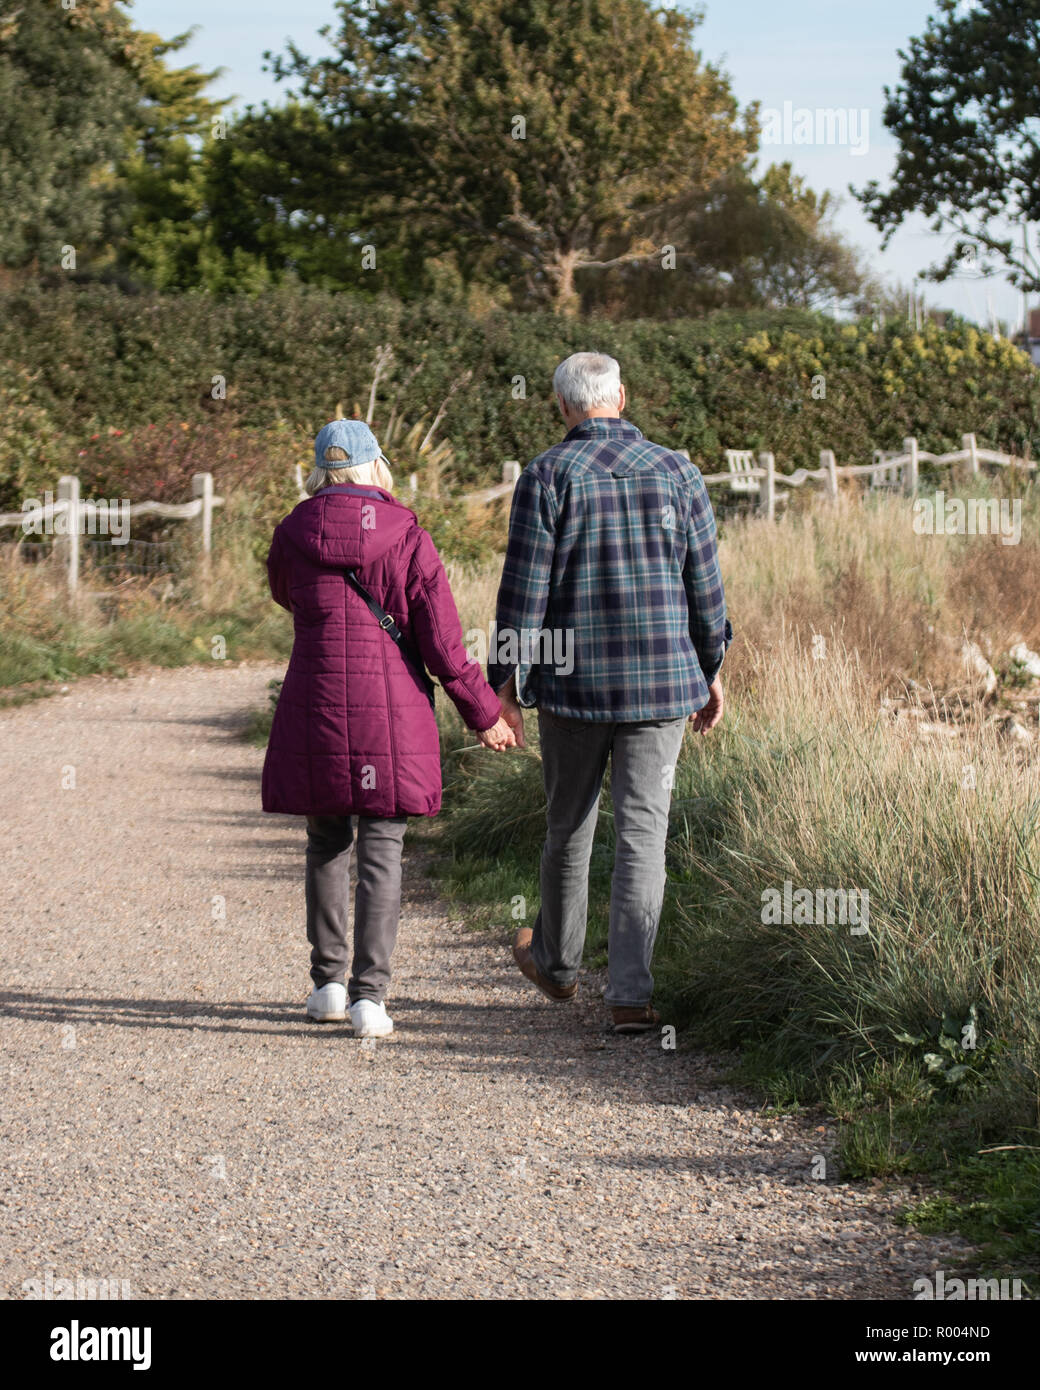 An elderly couple walking on path holding hands Stock Photo